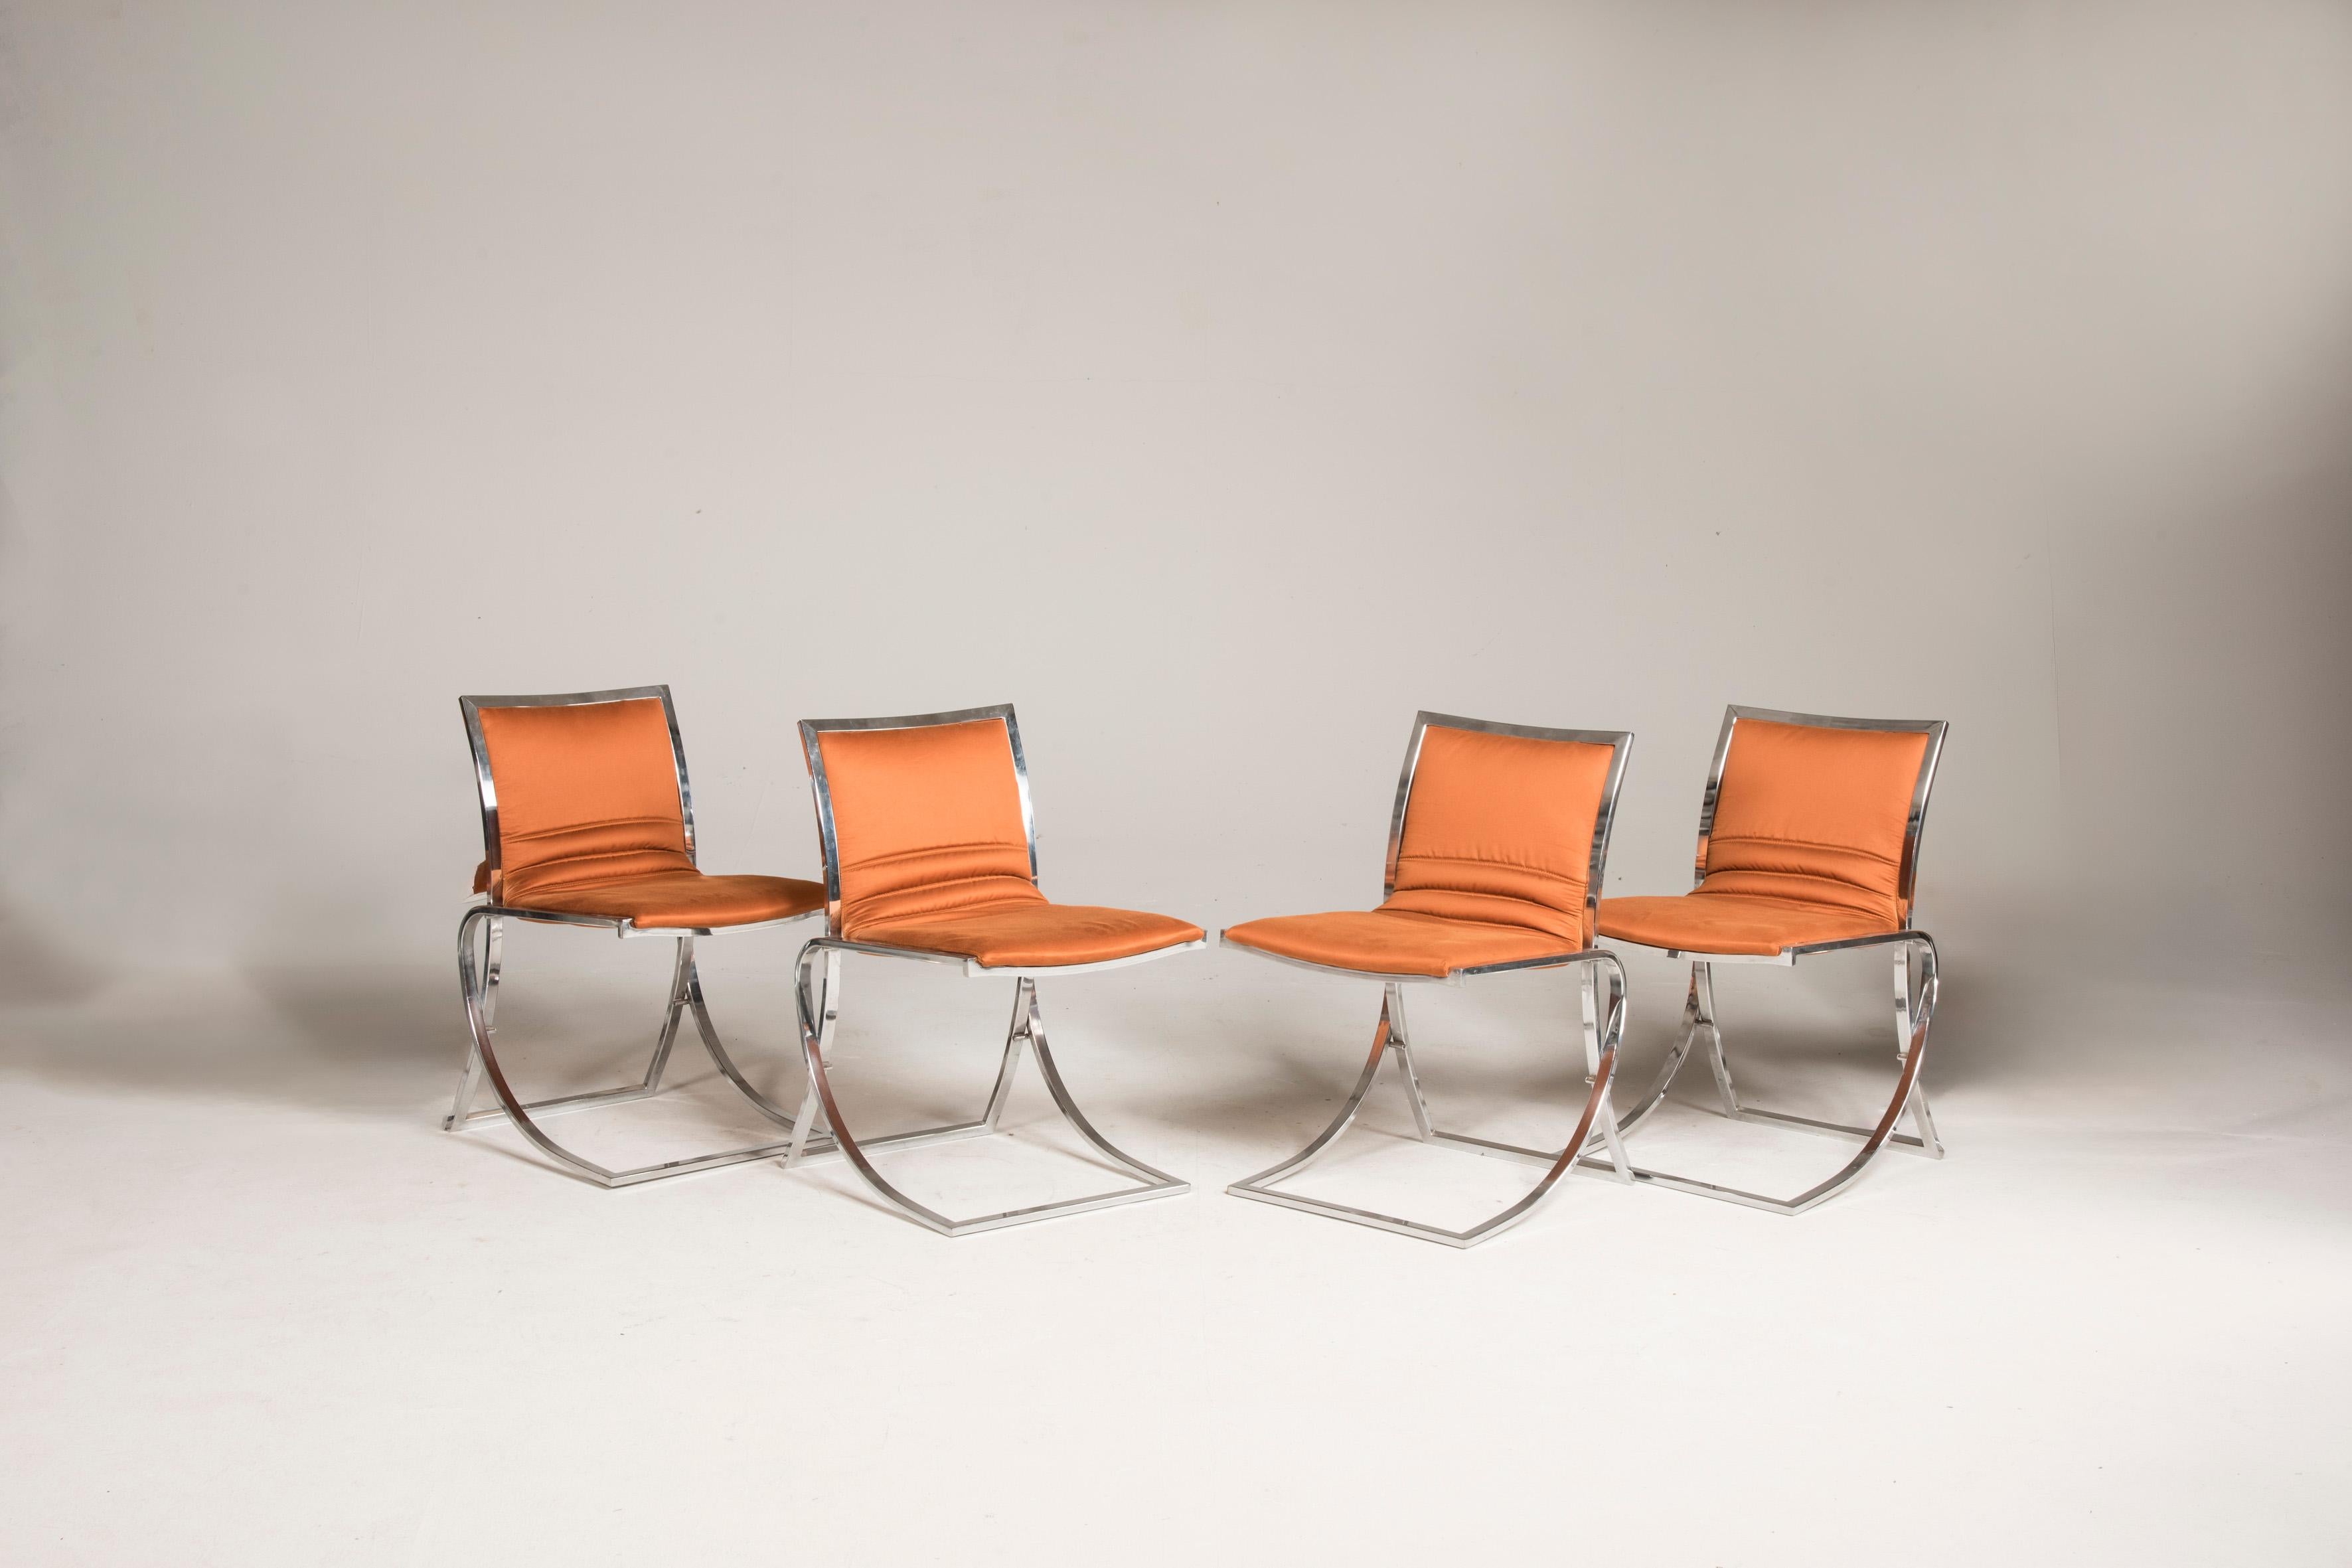 1970s Orange Upholstery Chromed Steel Chairs Set of 4 For Sale 2